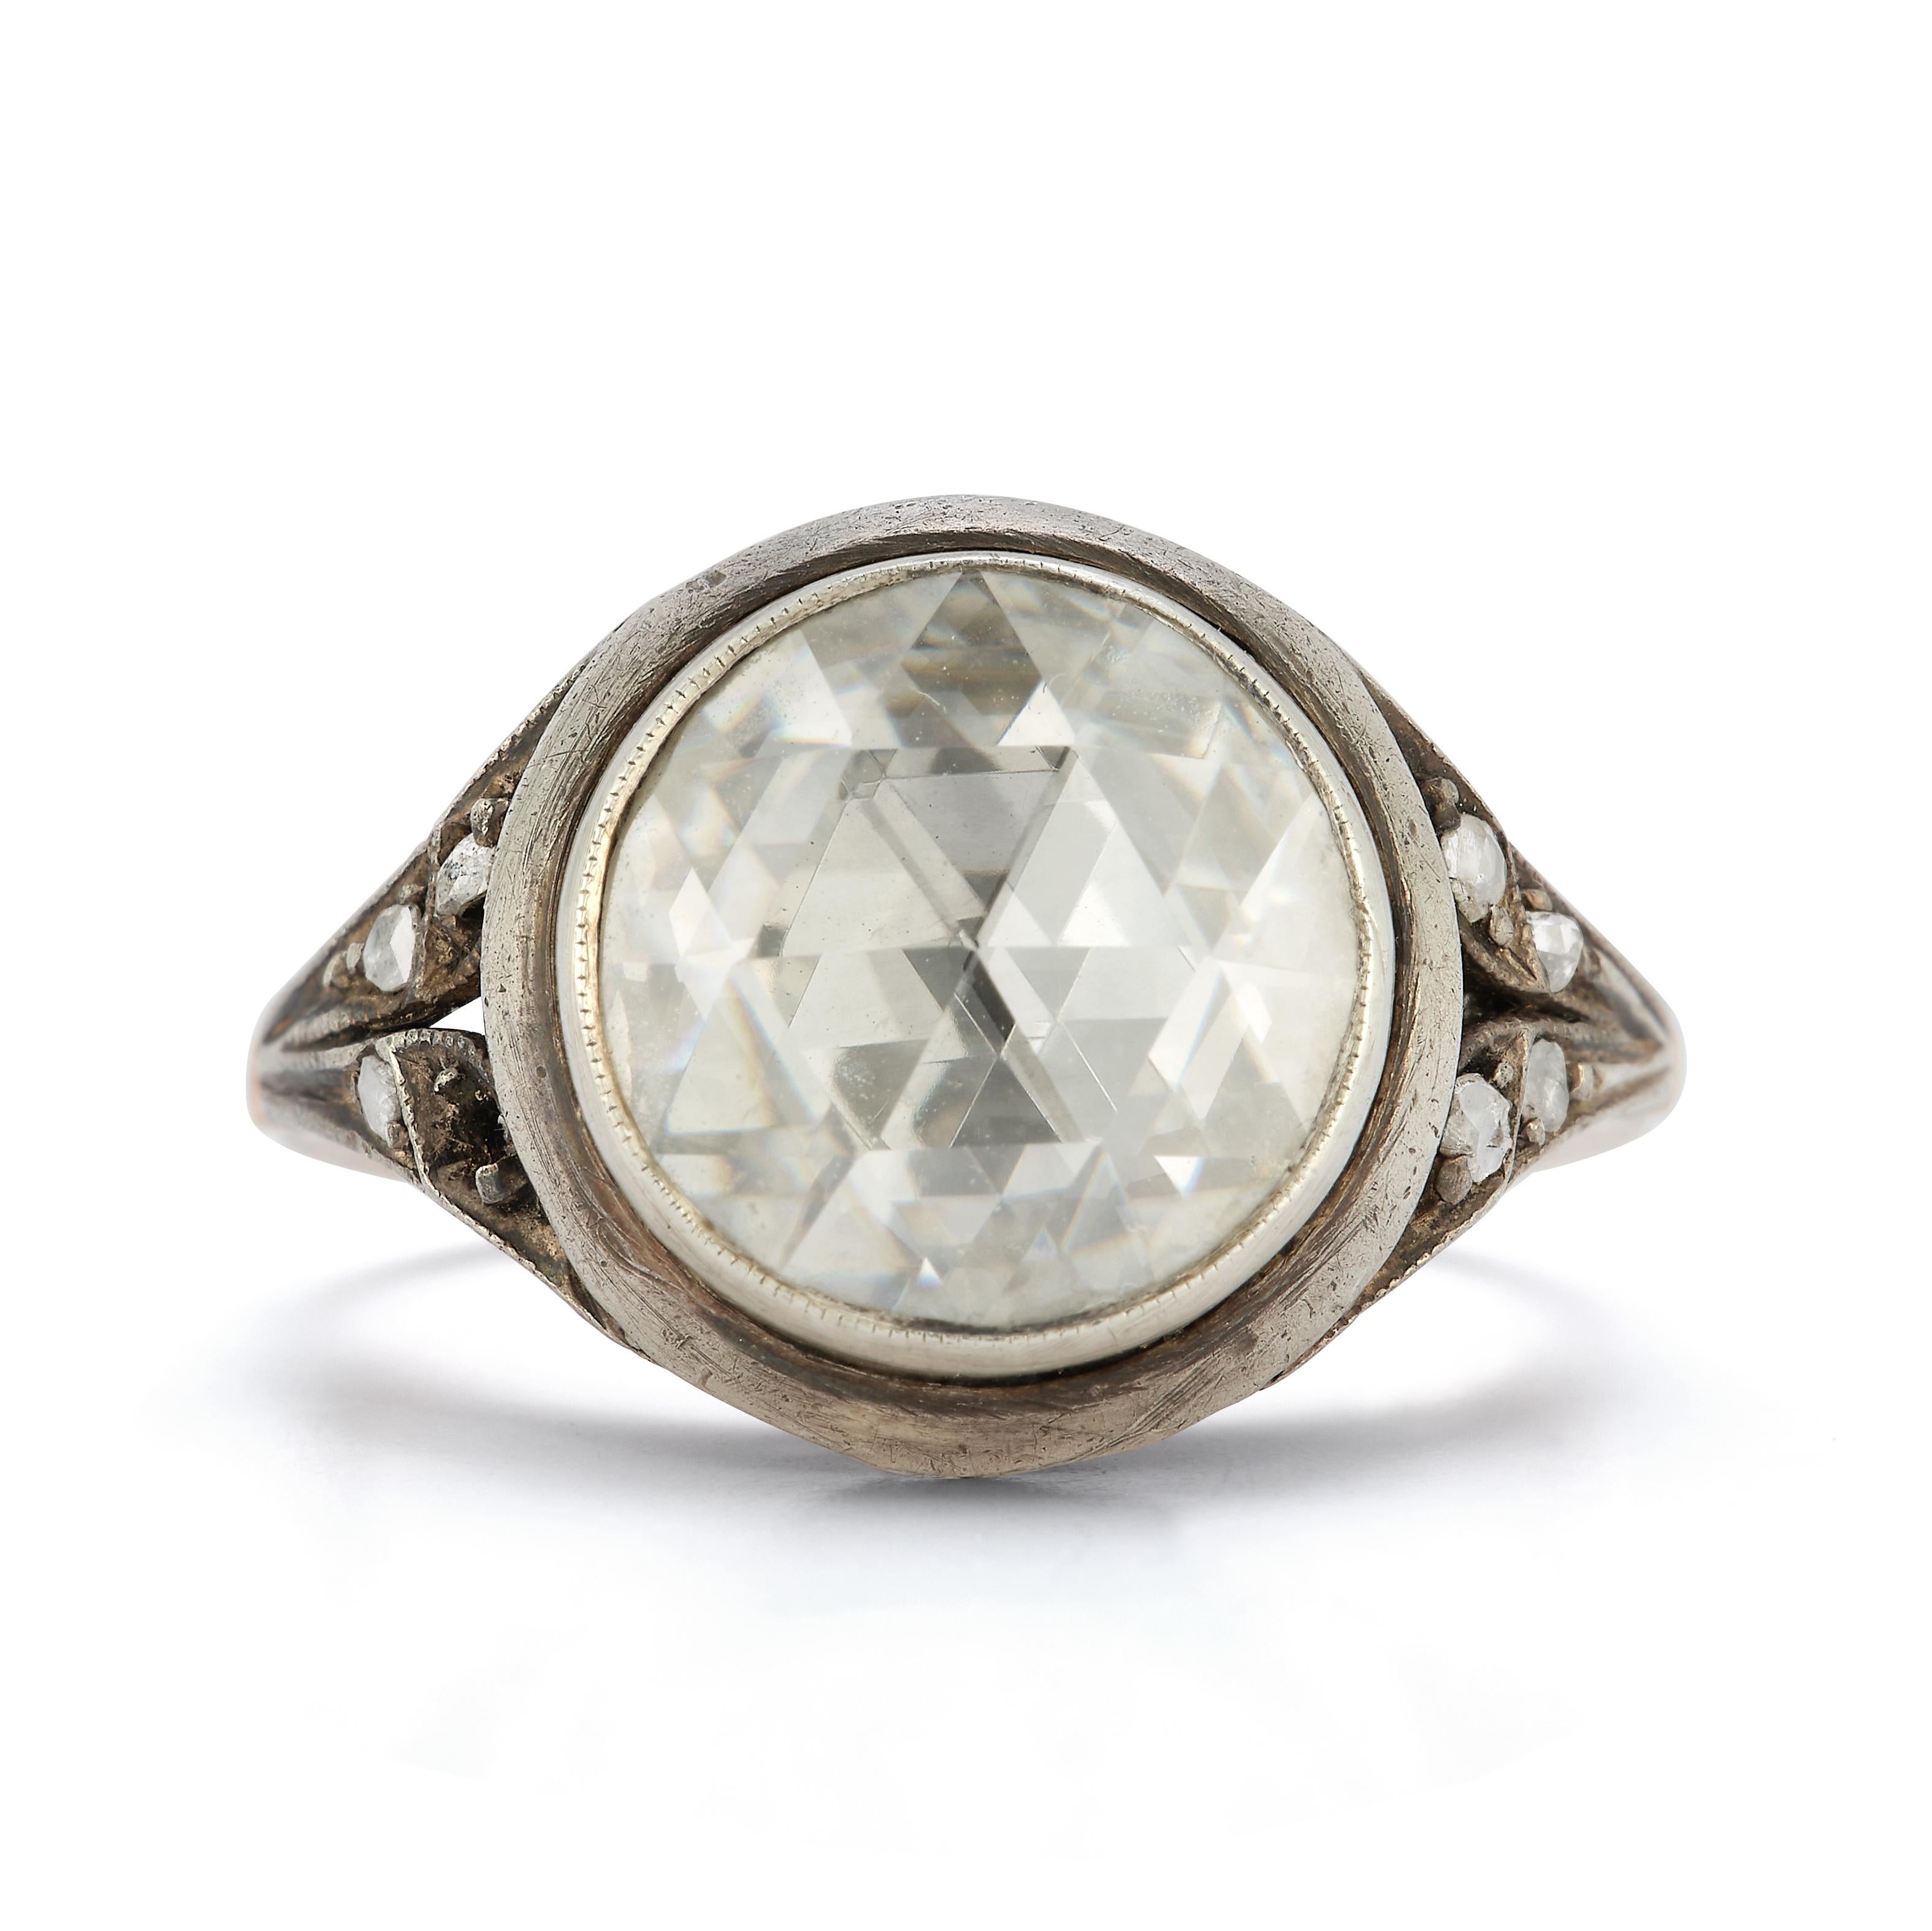 Antique Rose Cut Diamond Ring

An antique ring with a central rose-cut diamond. Made circa 1900

Ring Size: 7.25
Resizable free of charge
Metal types: 18K Gold and Silver